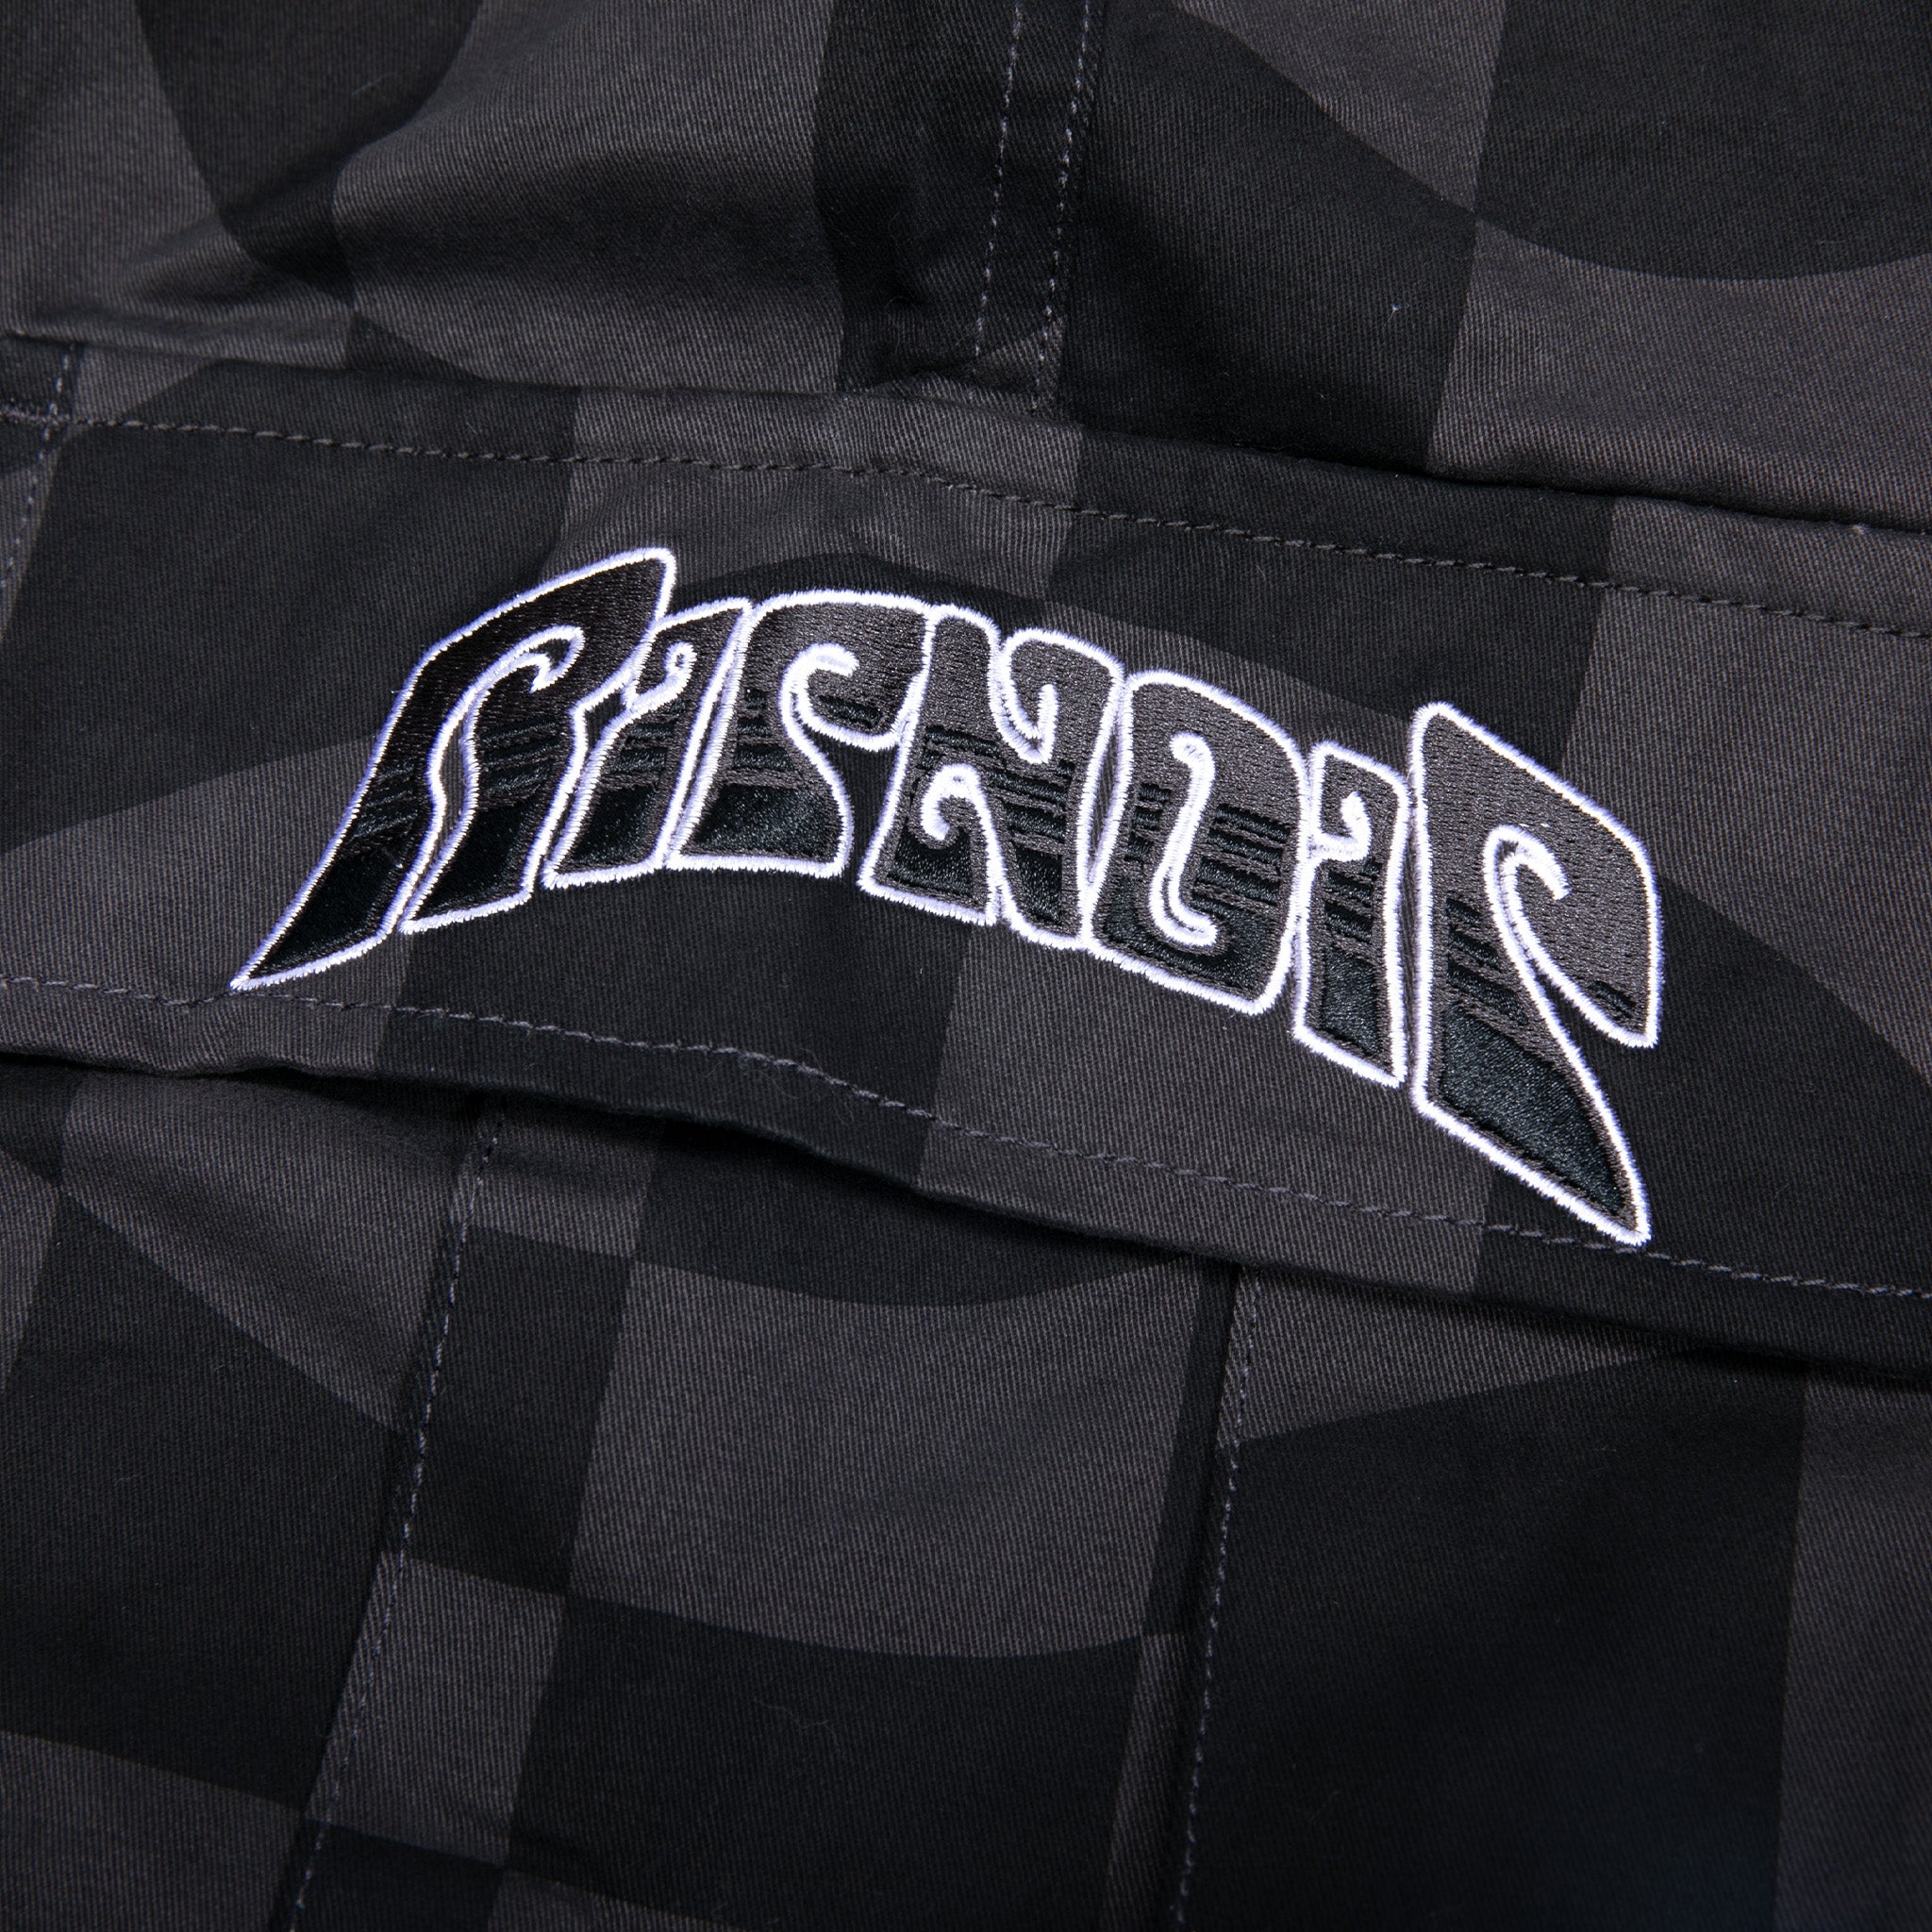 Checked Cargo Pants (Black/Charcoal)